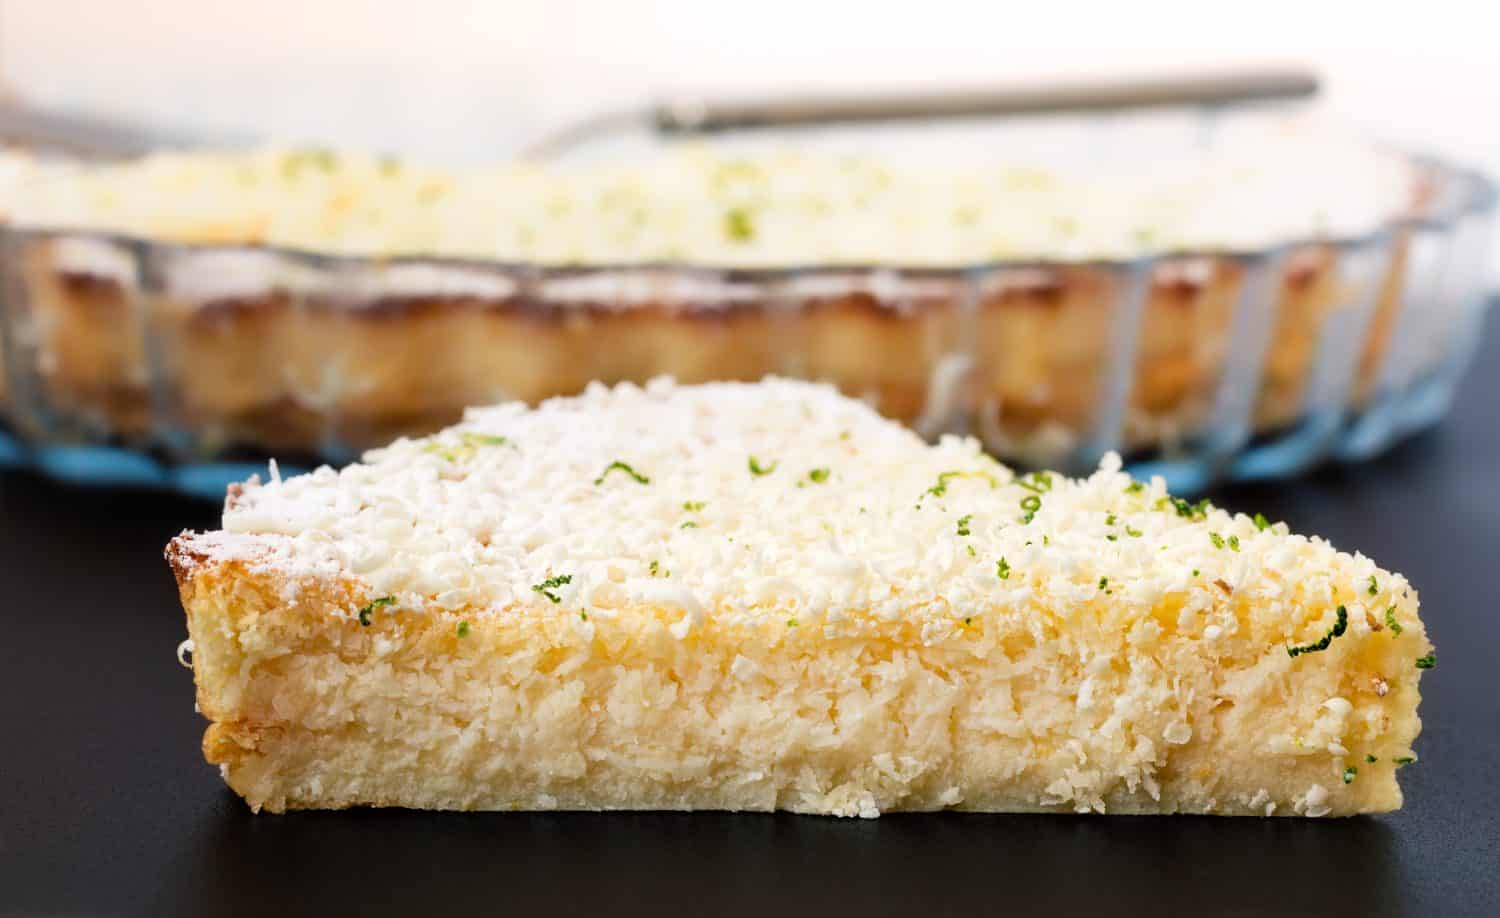 Lemon, lime, coconut impossible pie with white chocolate shavings slice with baking dish in the background